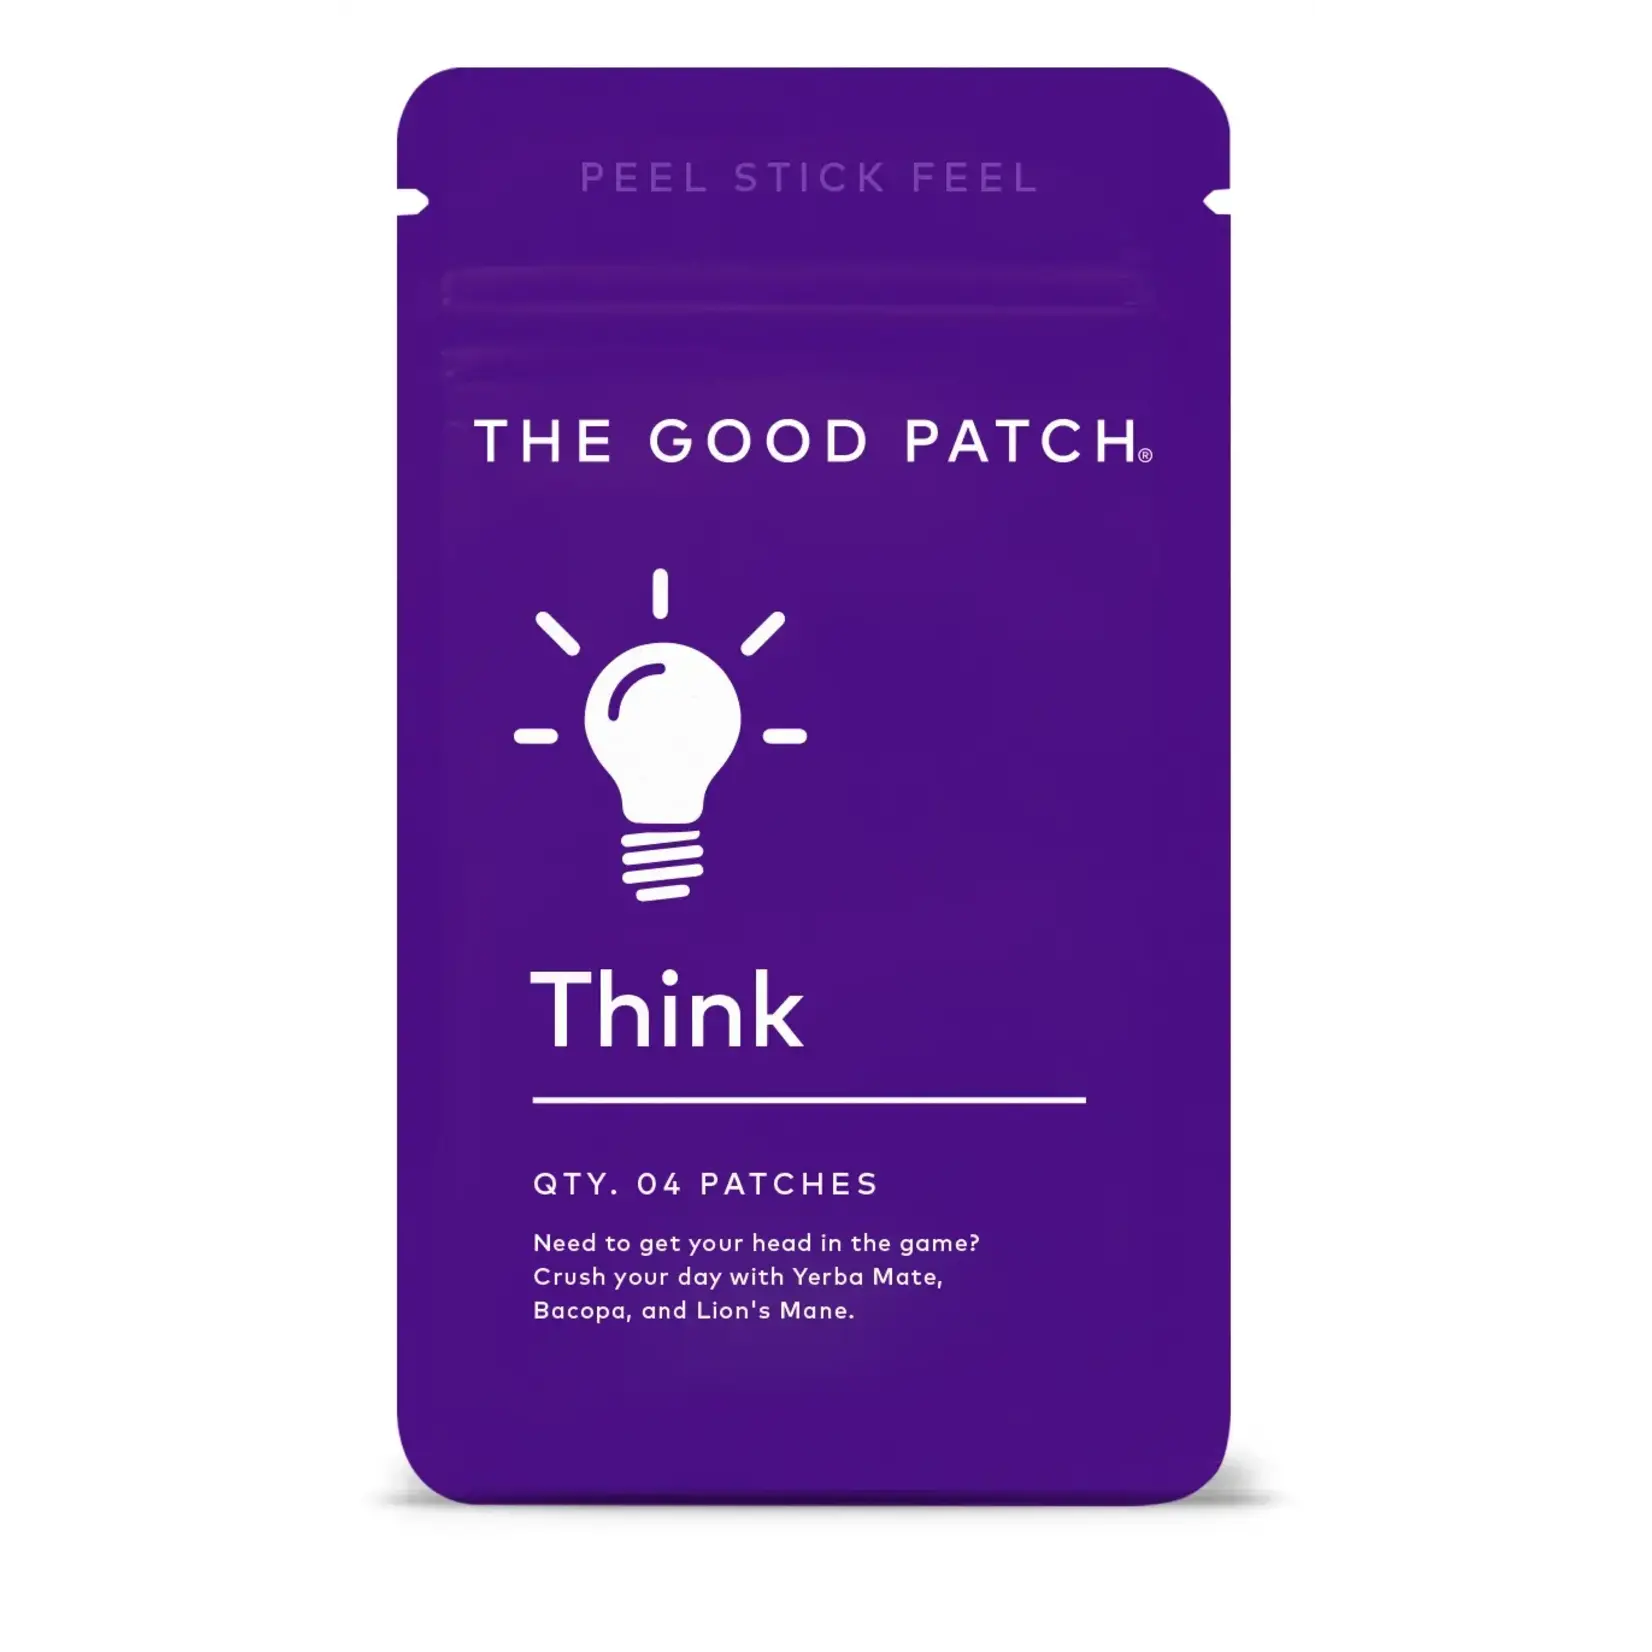 The Good Patch Plant-Based Wellness Patch